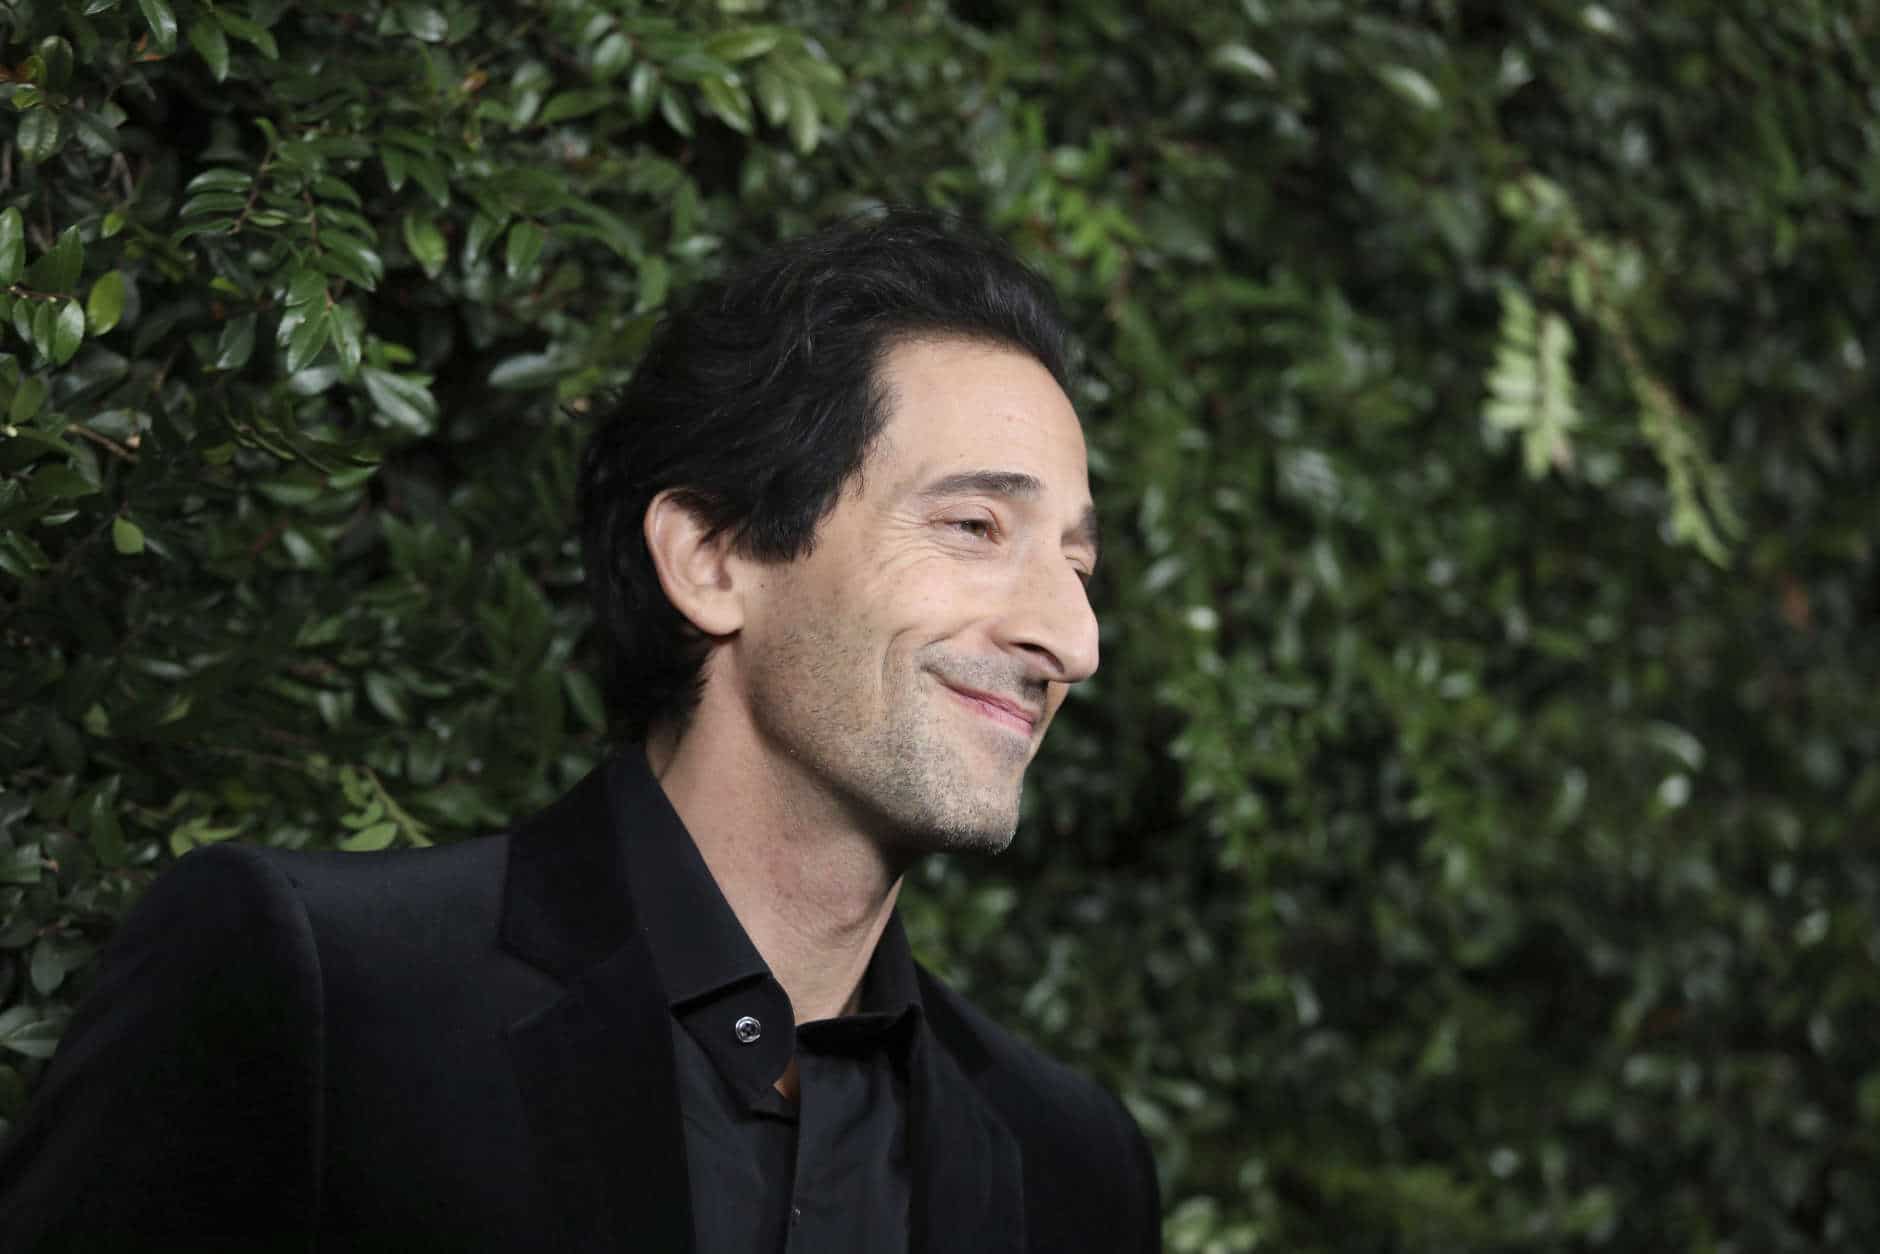 Adrien Brody arrives at the CHANEL Pre-Oscar Dinner at Madeo Restaurant on Saturday, March 3, 2018, in Los Angeles. (Photo by Omar Vega/Invision/AP)